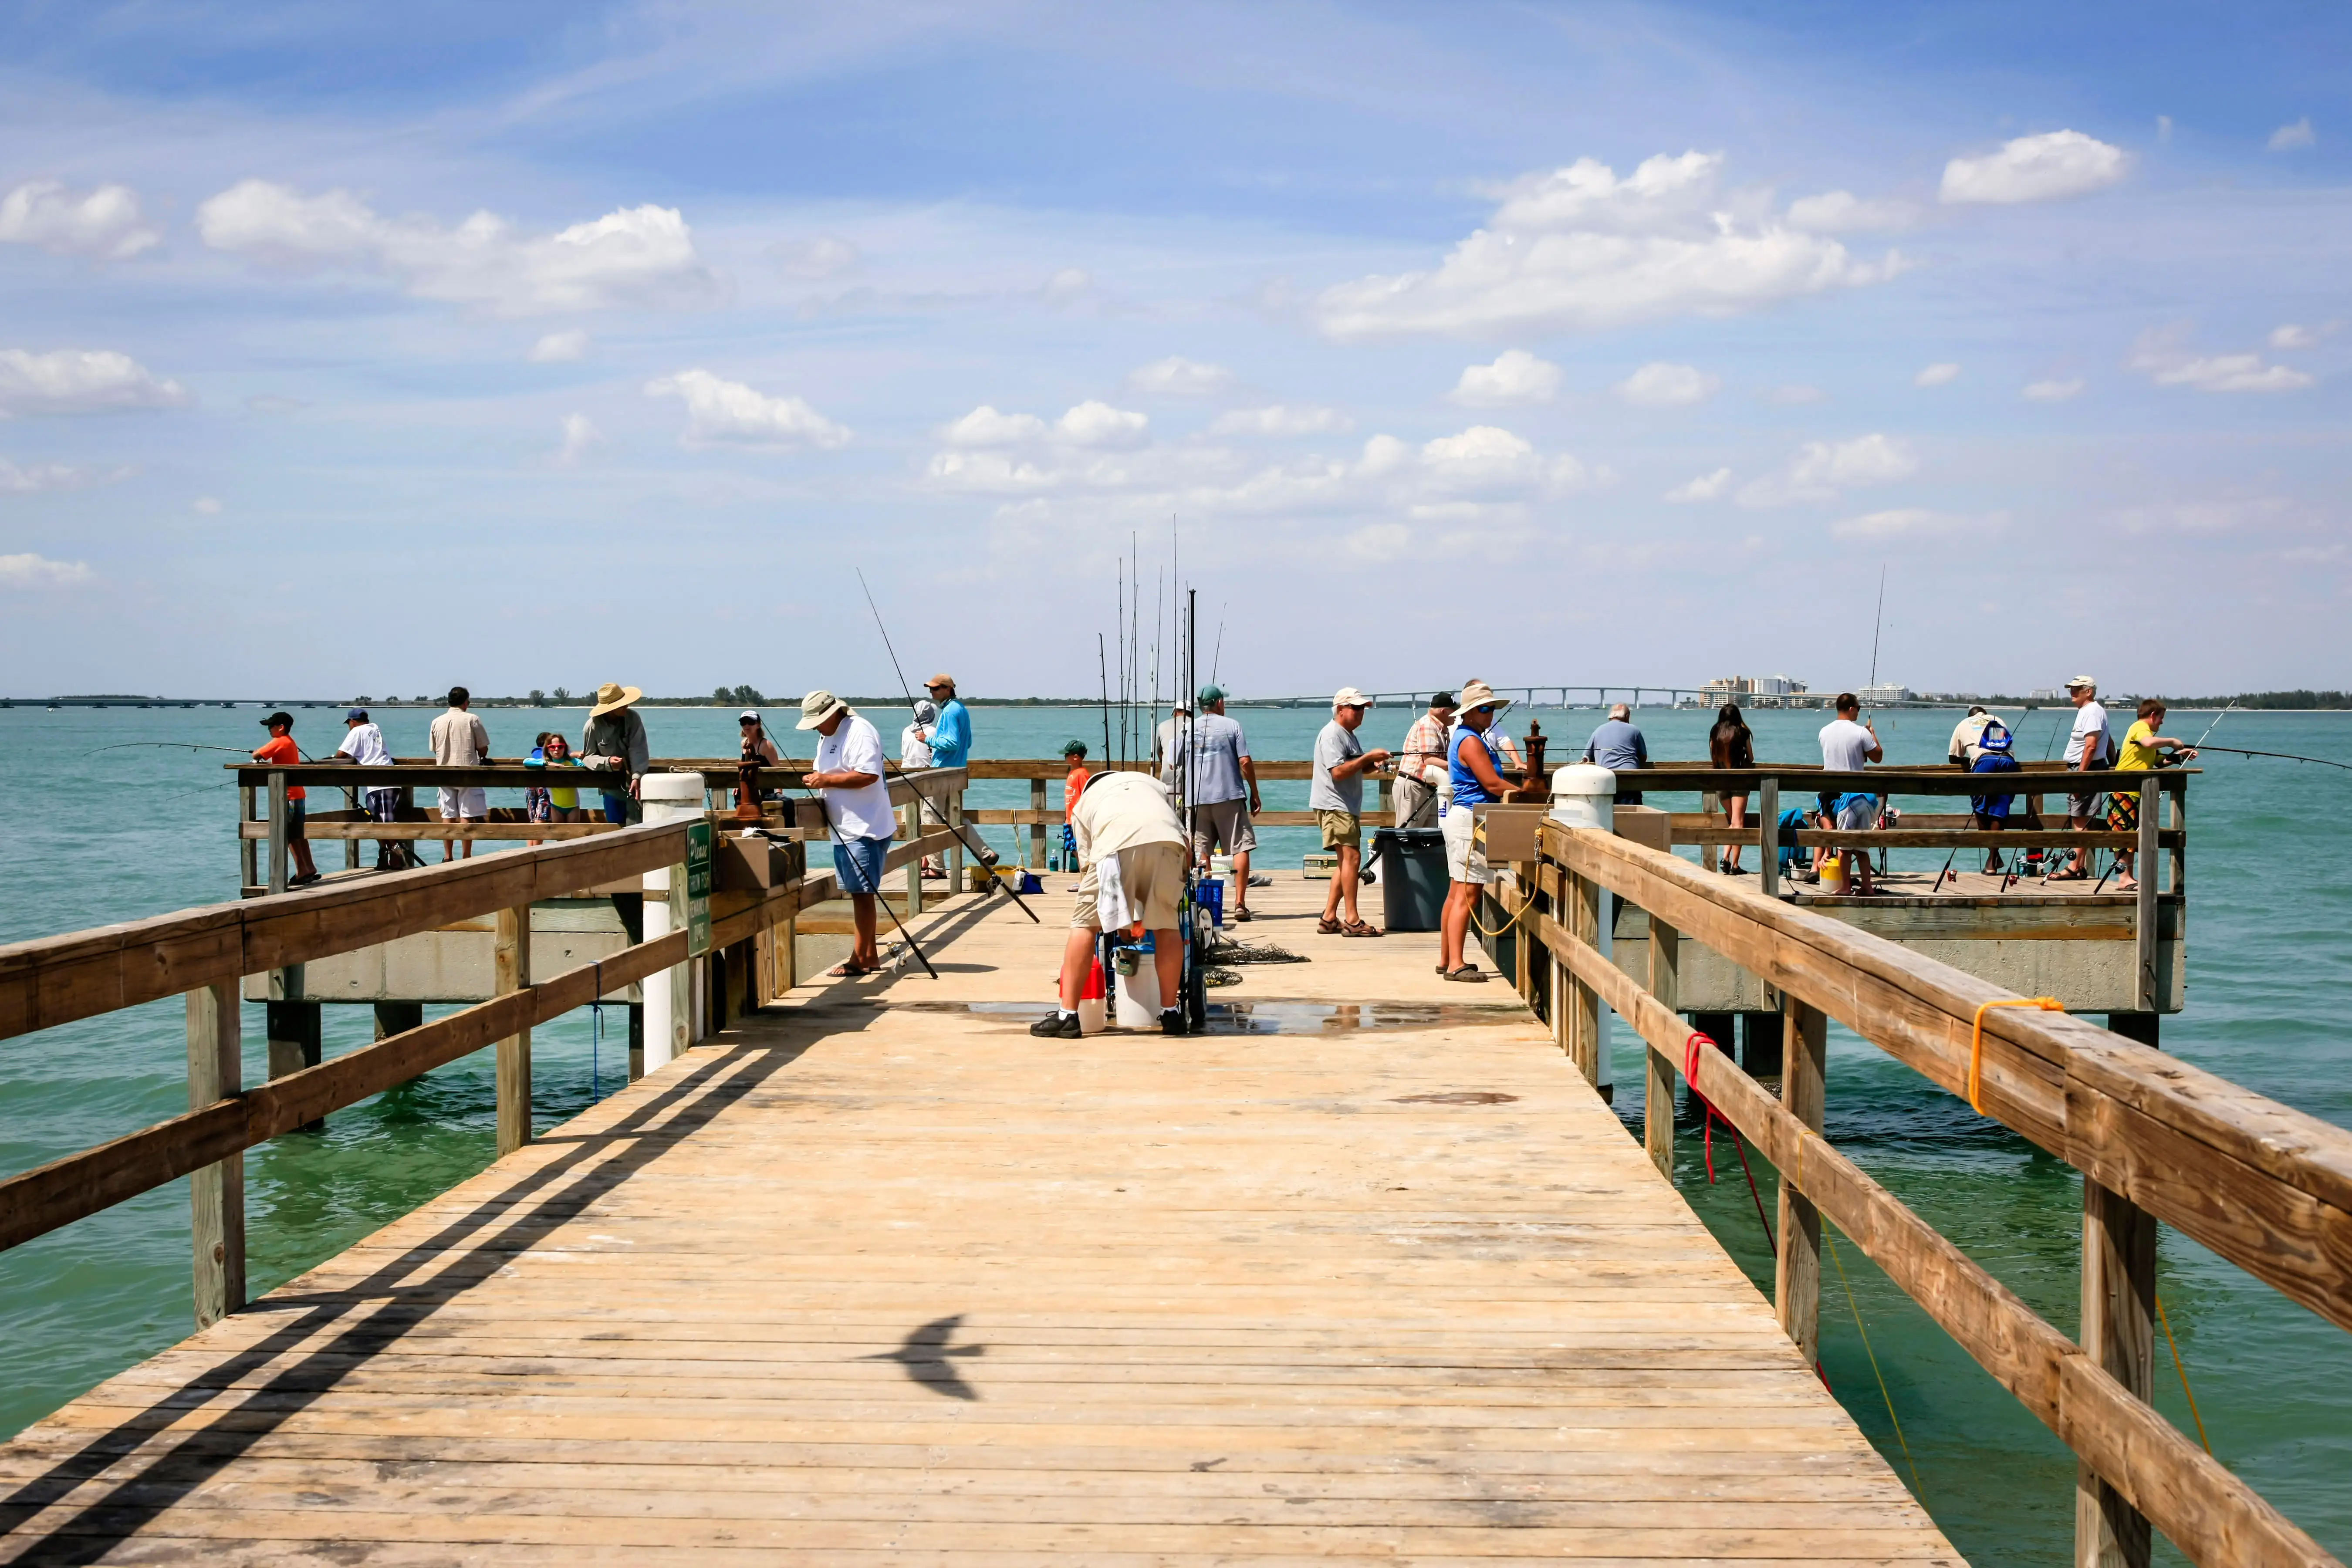 The Fishing Pier on Sanibel island Florida popular with all ages